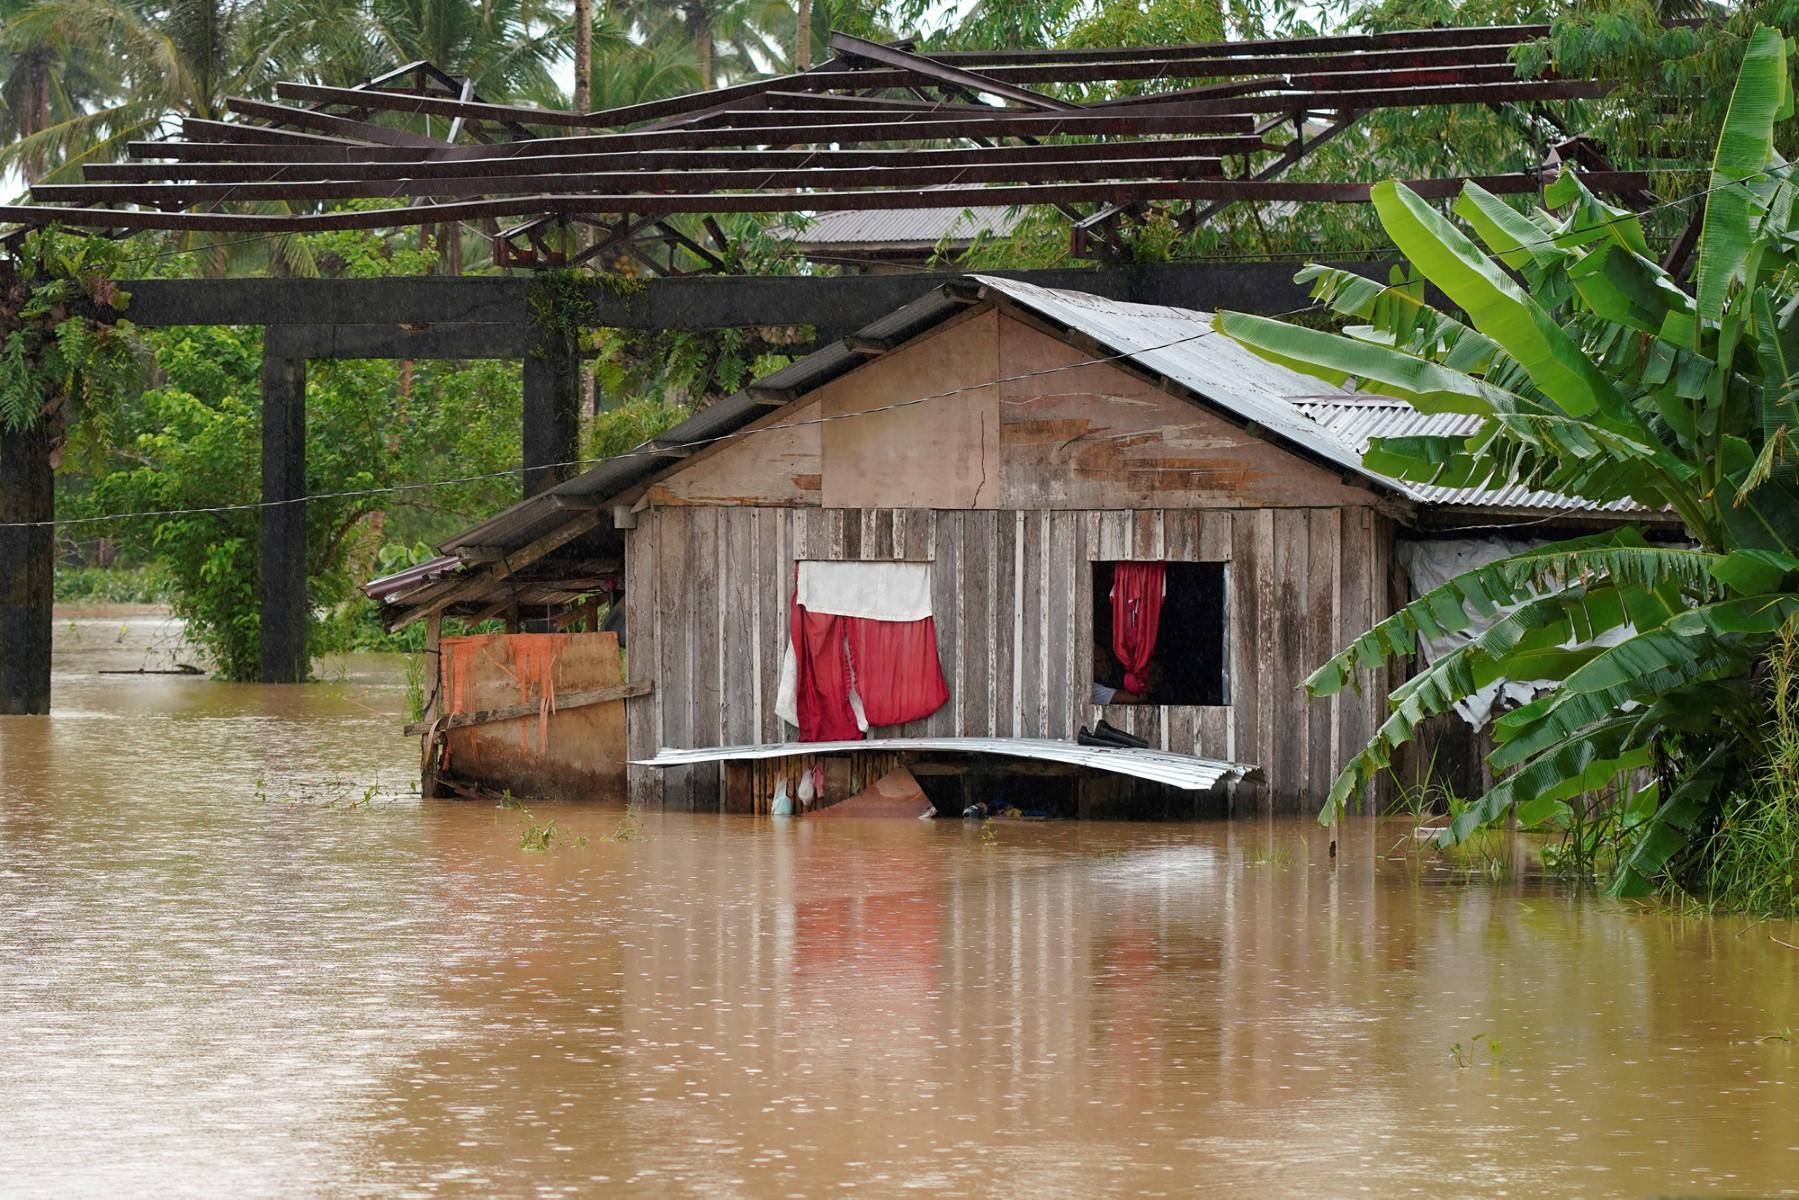 Residents look outside the window of their submerged house after heavy rains brought about by Tropical storm Agaton in Abuyog town, Leyte province, southern Philippines on April 11